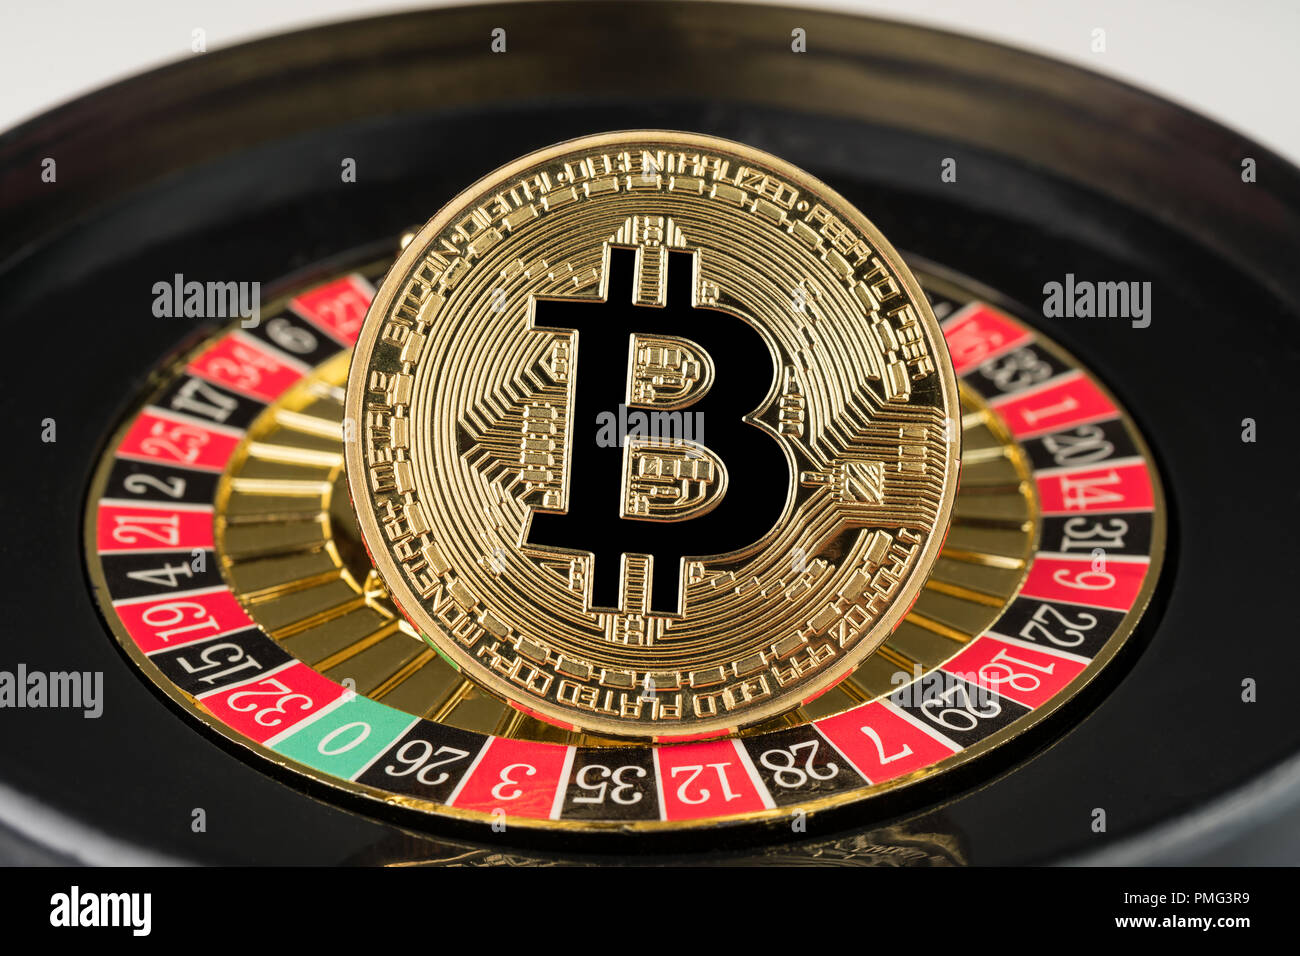 Wondering How To Make Your bitcoin casino Rock? Read This!